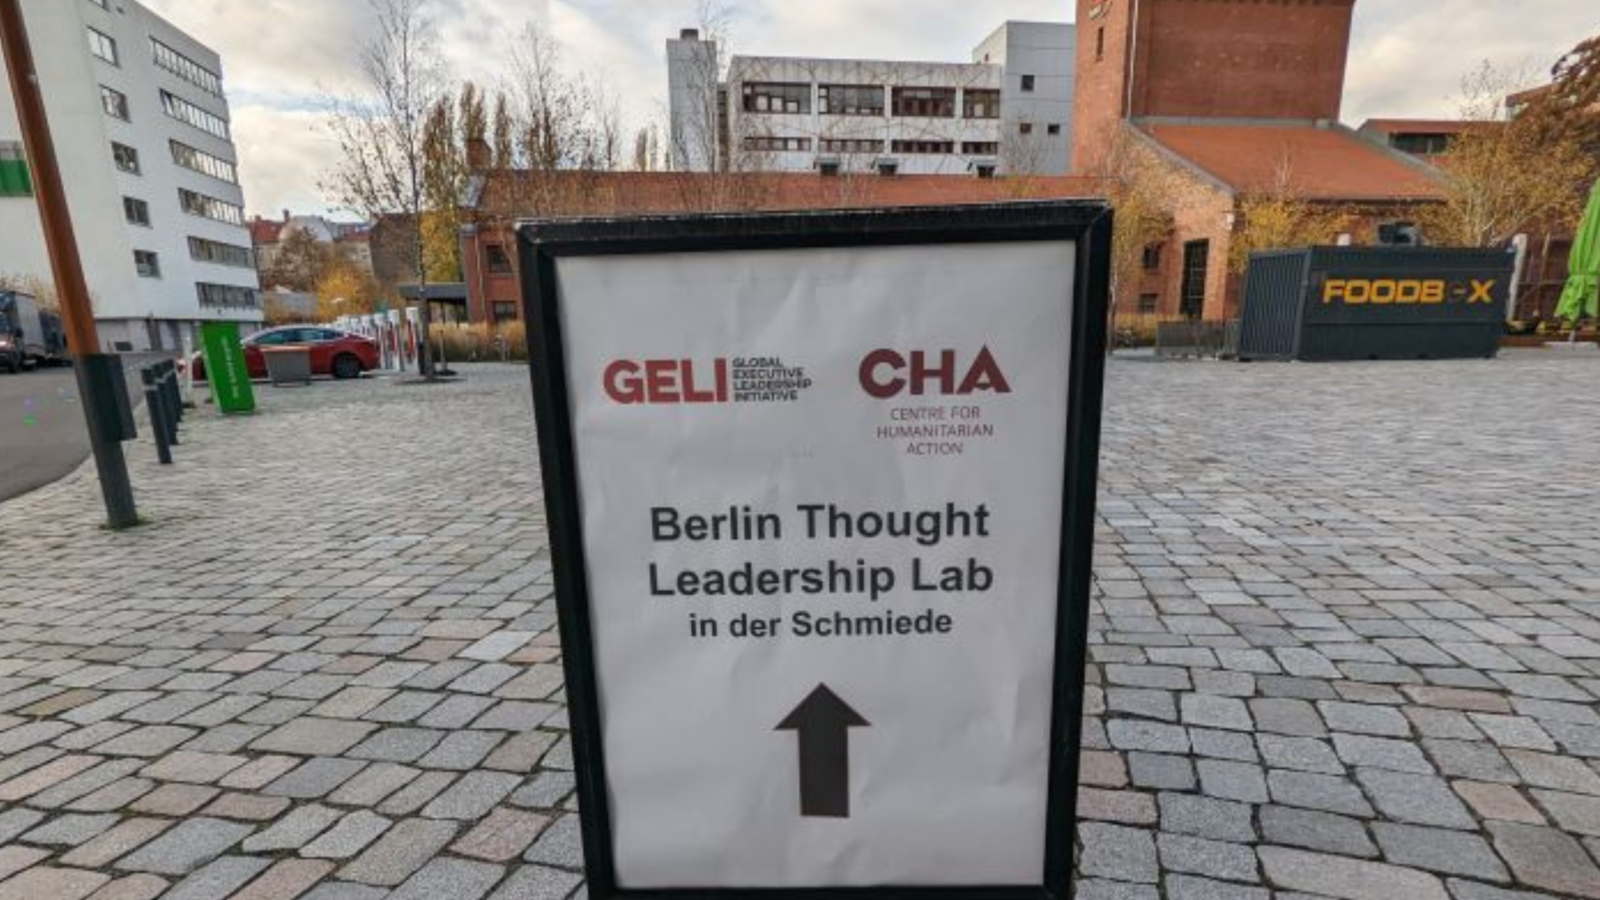 Berlin Thought Leadership Lab